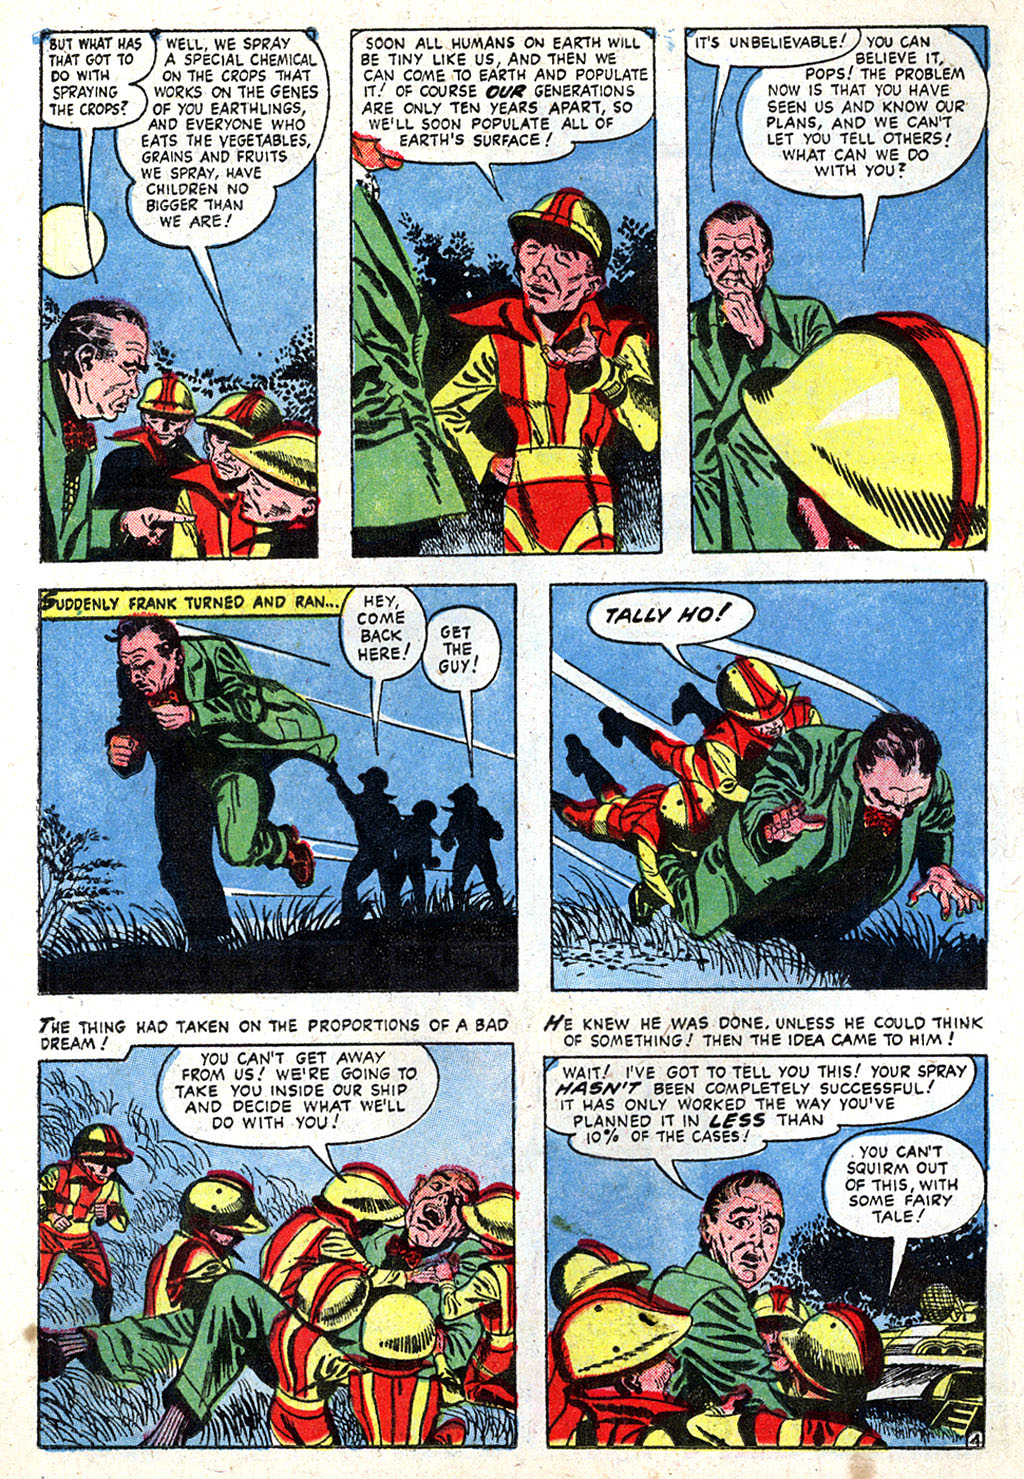 Marvel Tales (1949) 138 Page 15